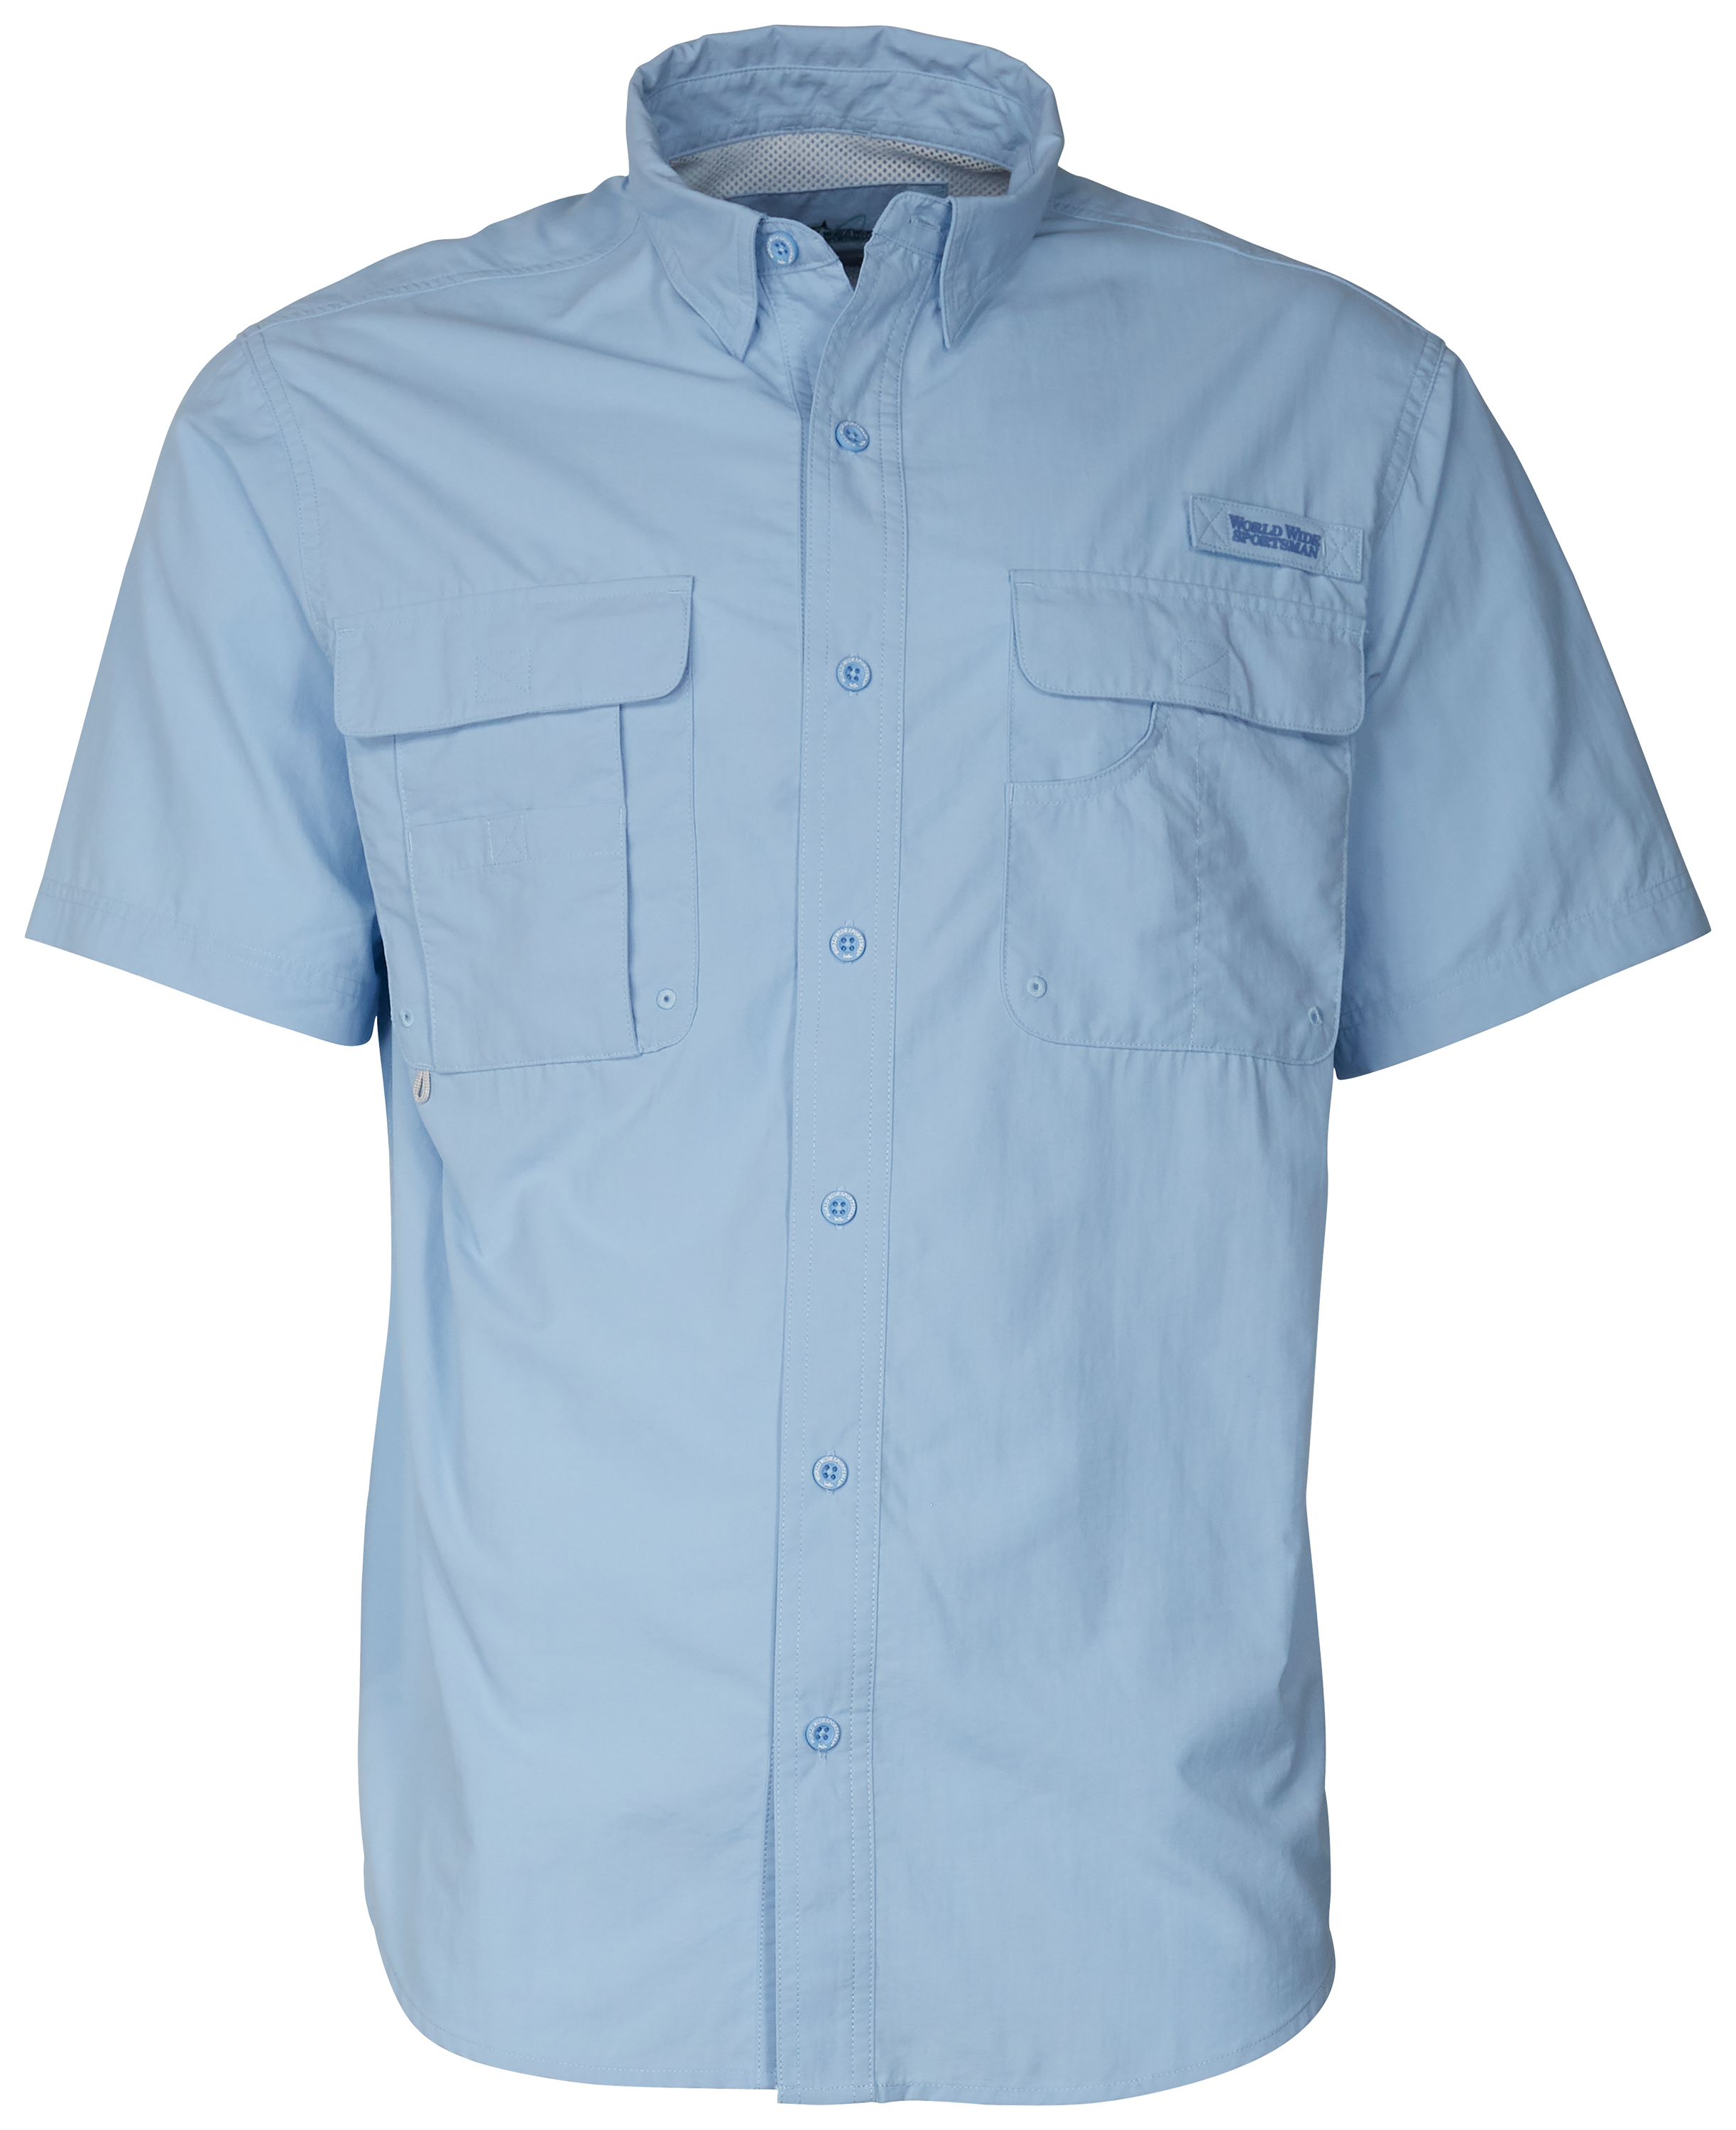 World Wide Sportsman Recycled-Nylon Angler 2.0 Short-Sleeve Button-Down Shirt for Men - Placid Blue - 4XL